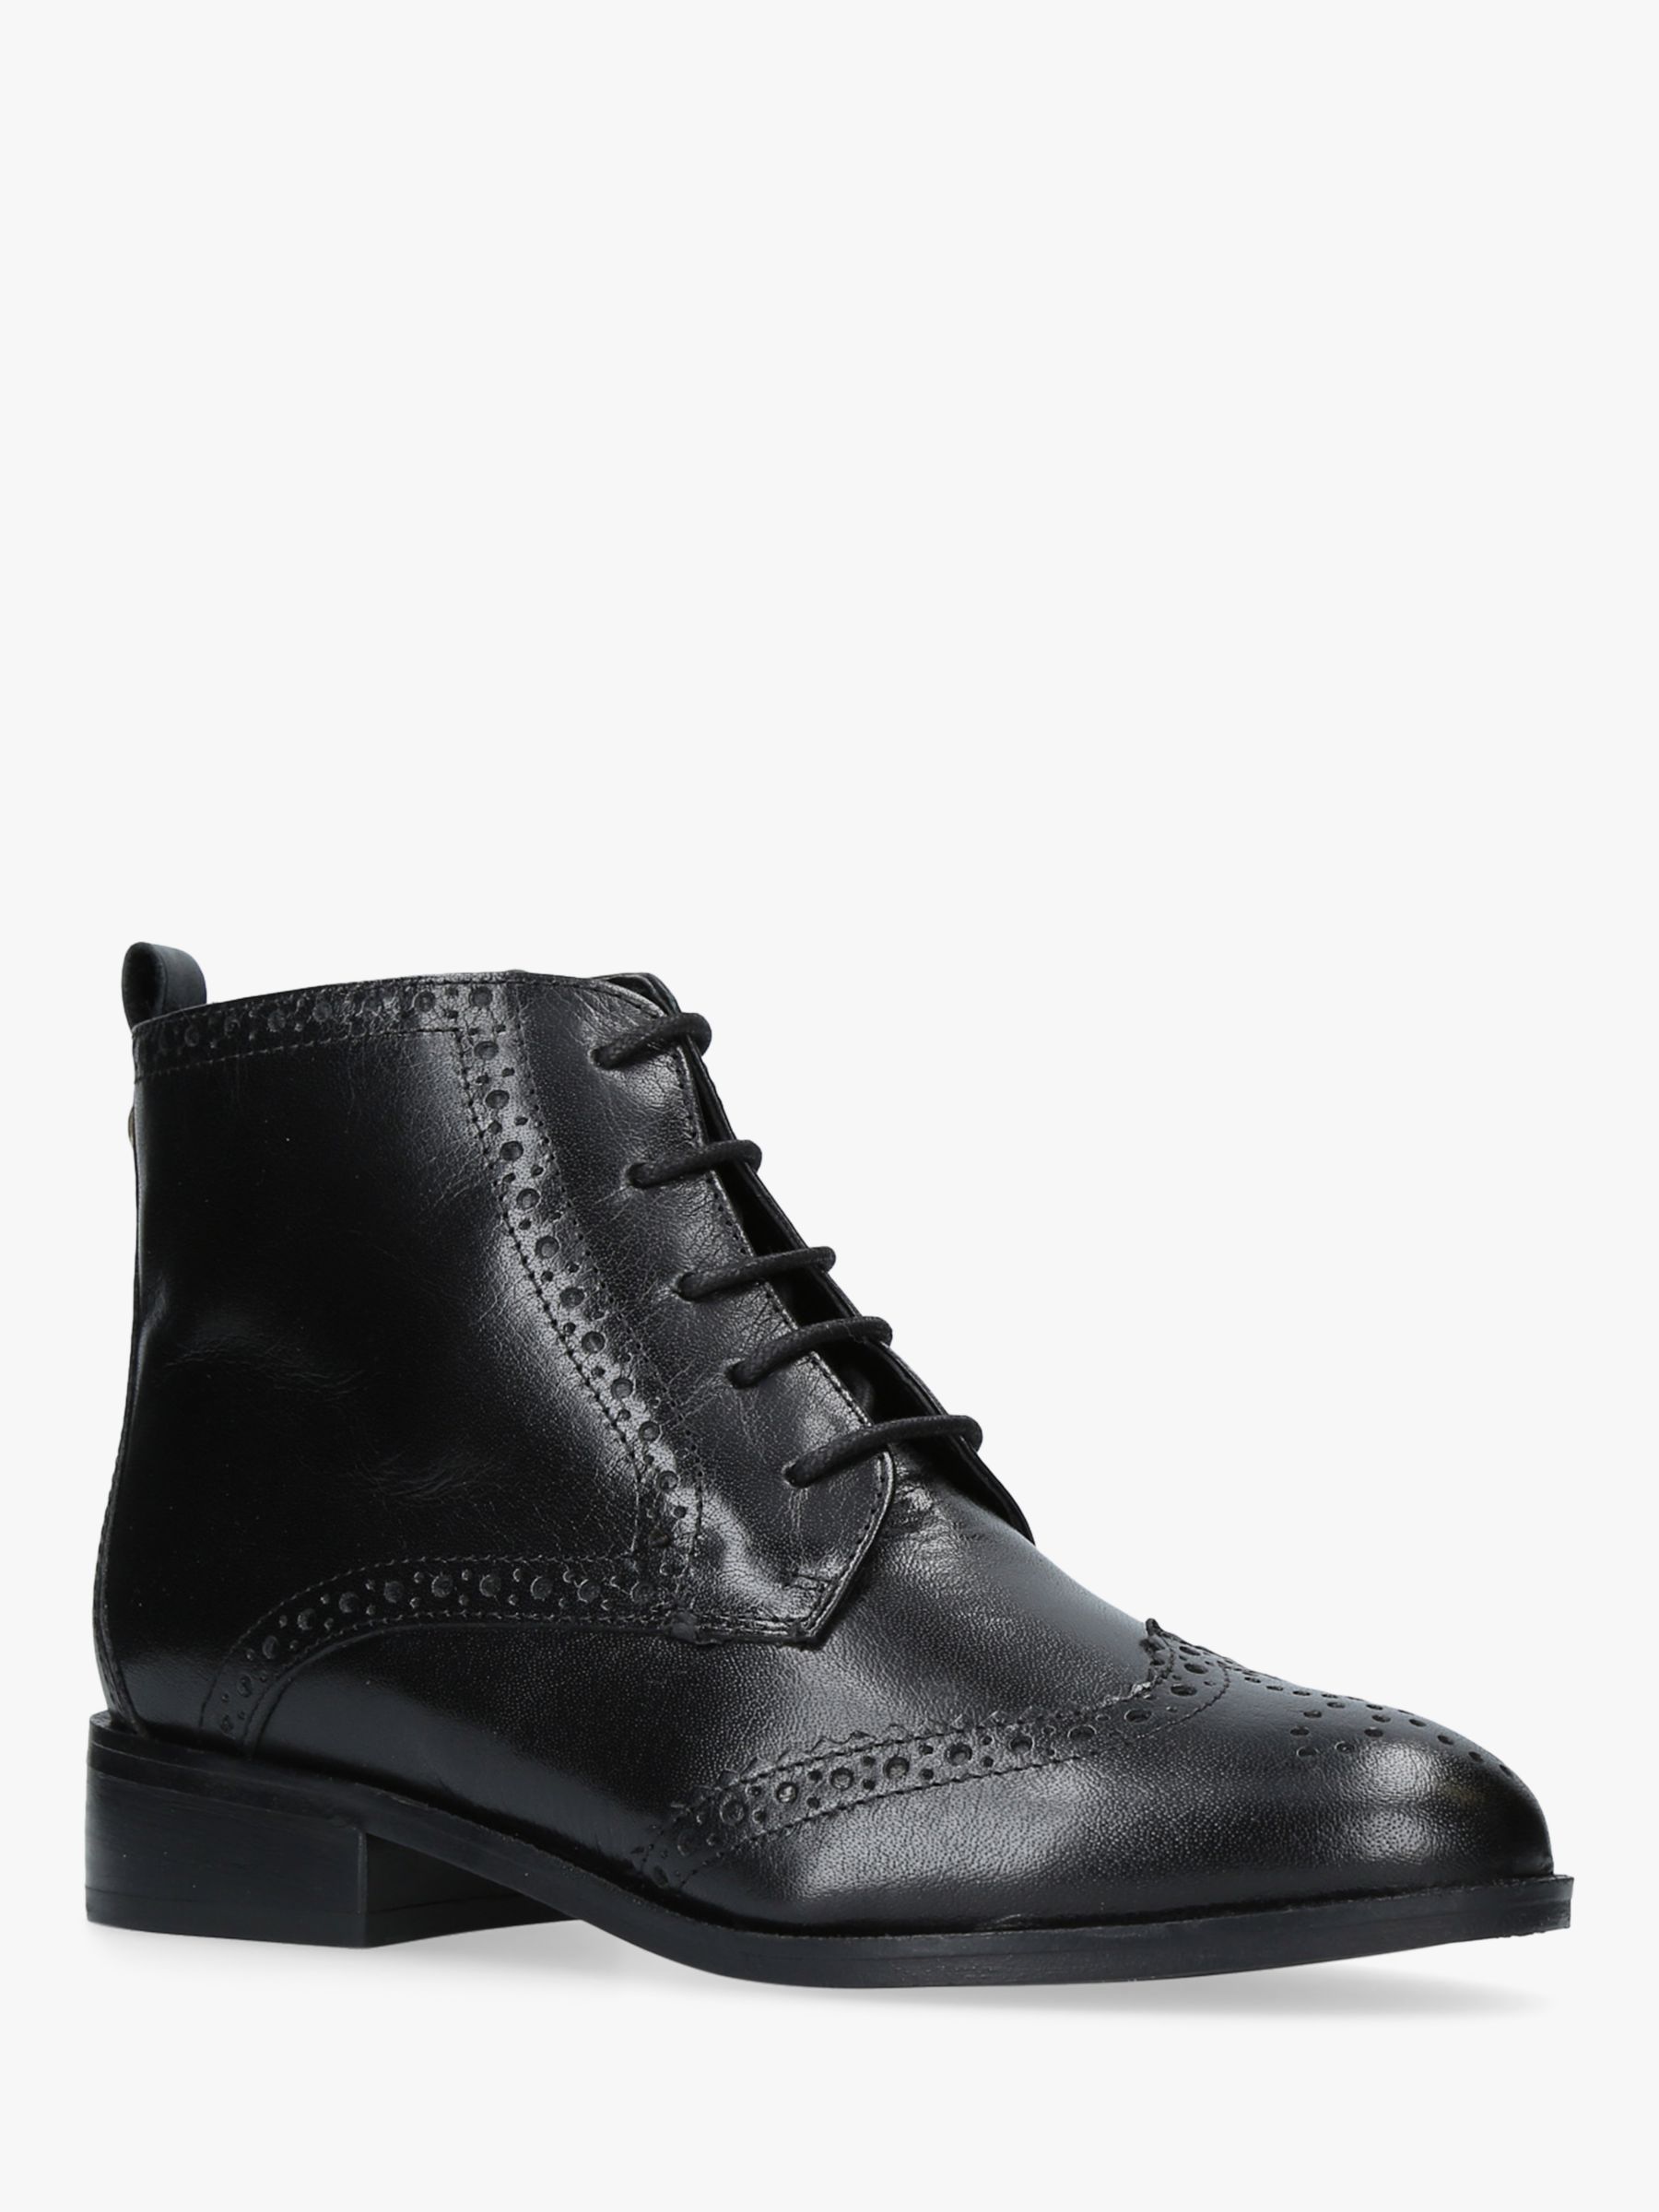 Carvela Toby Lace Up Brogue Ankle Boots